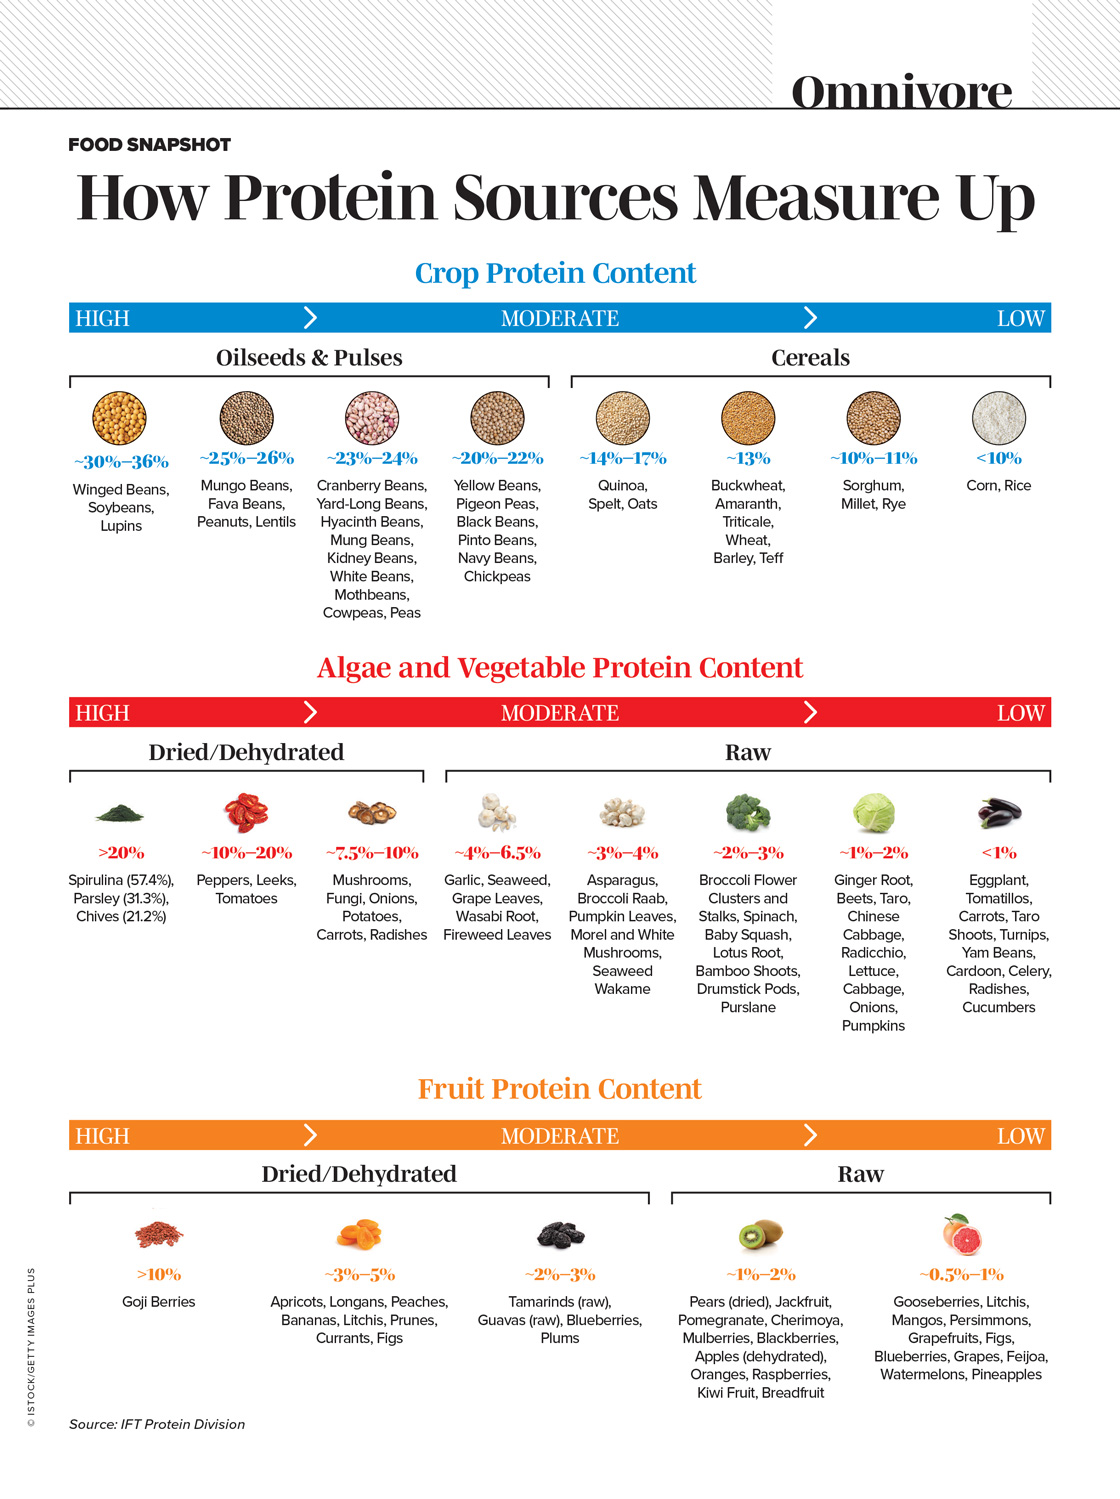  protein content of grains, fruits, and vegetables